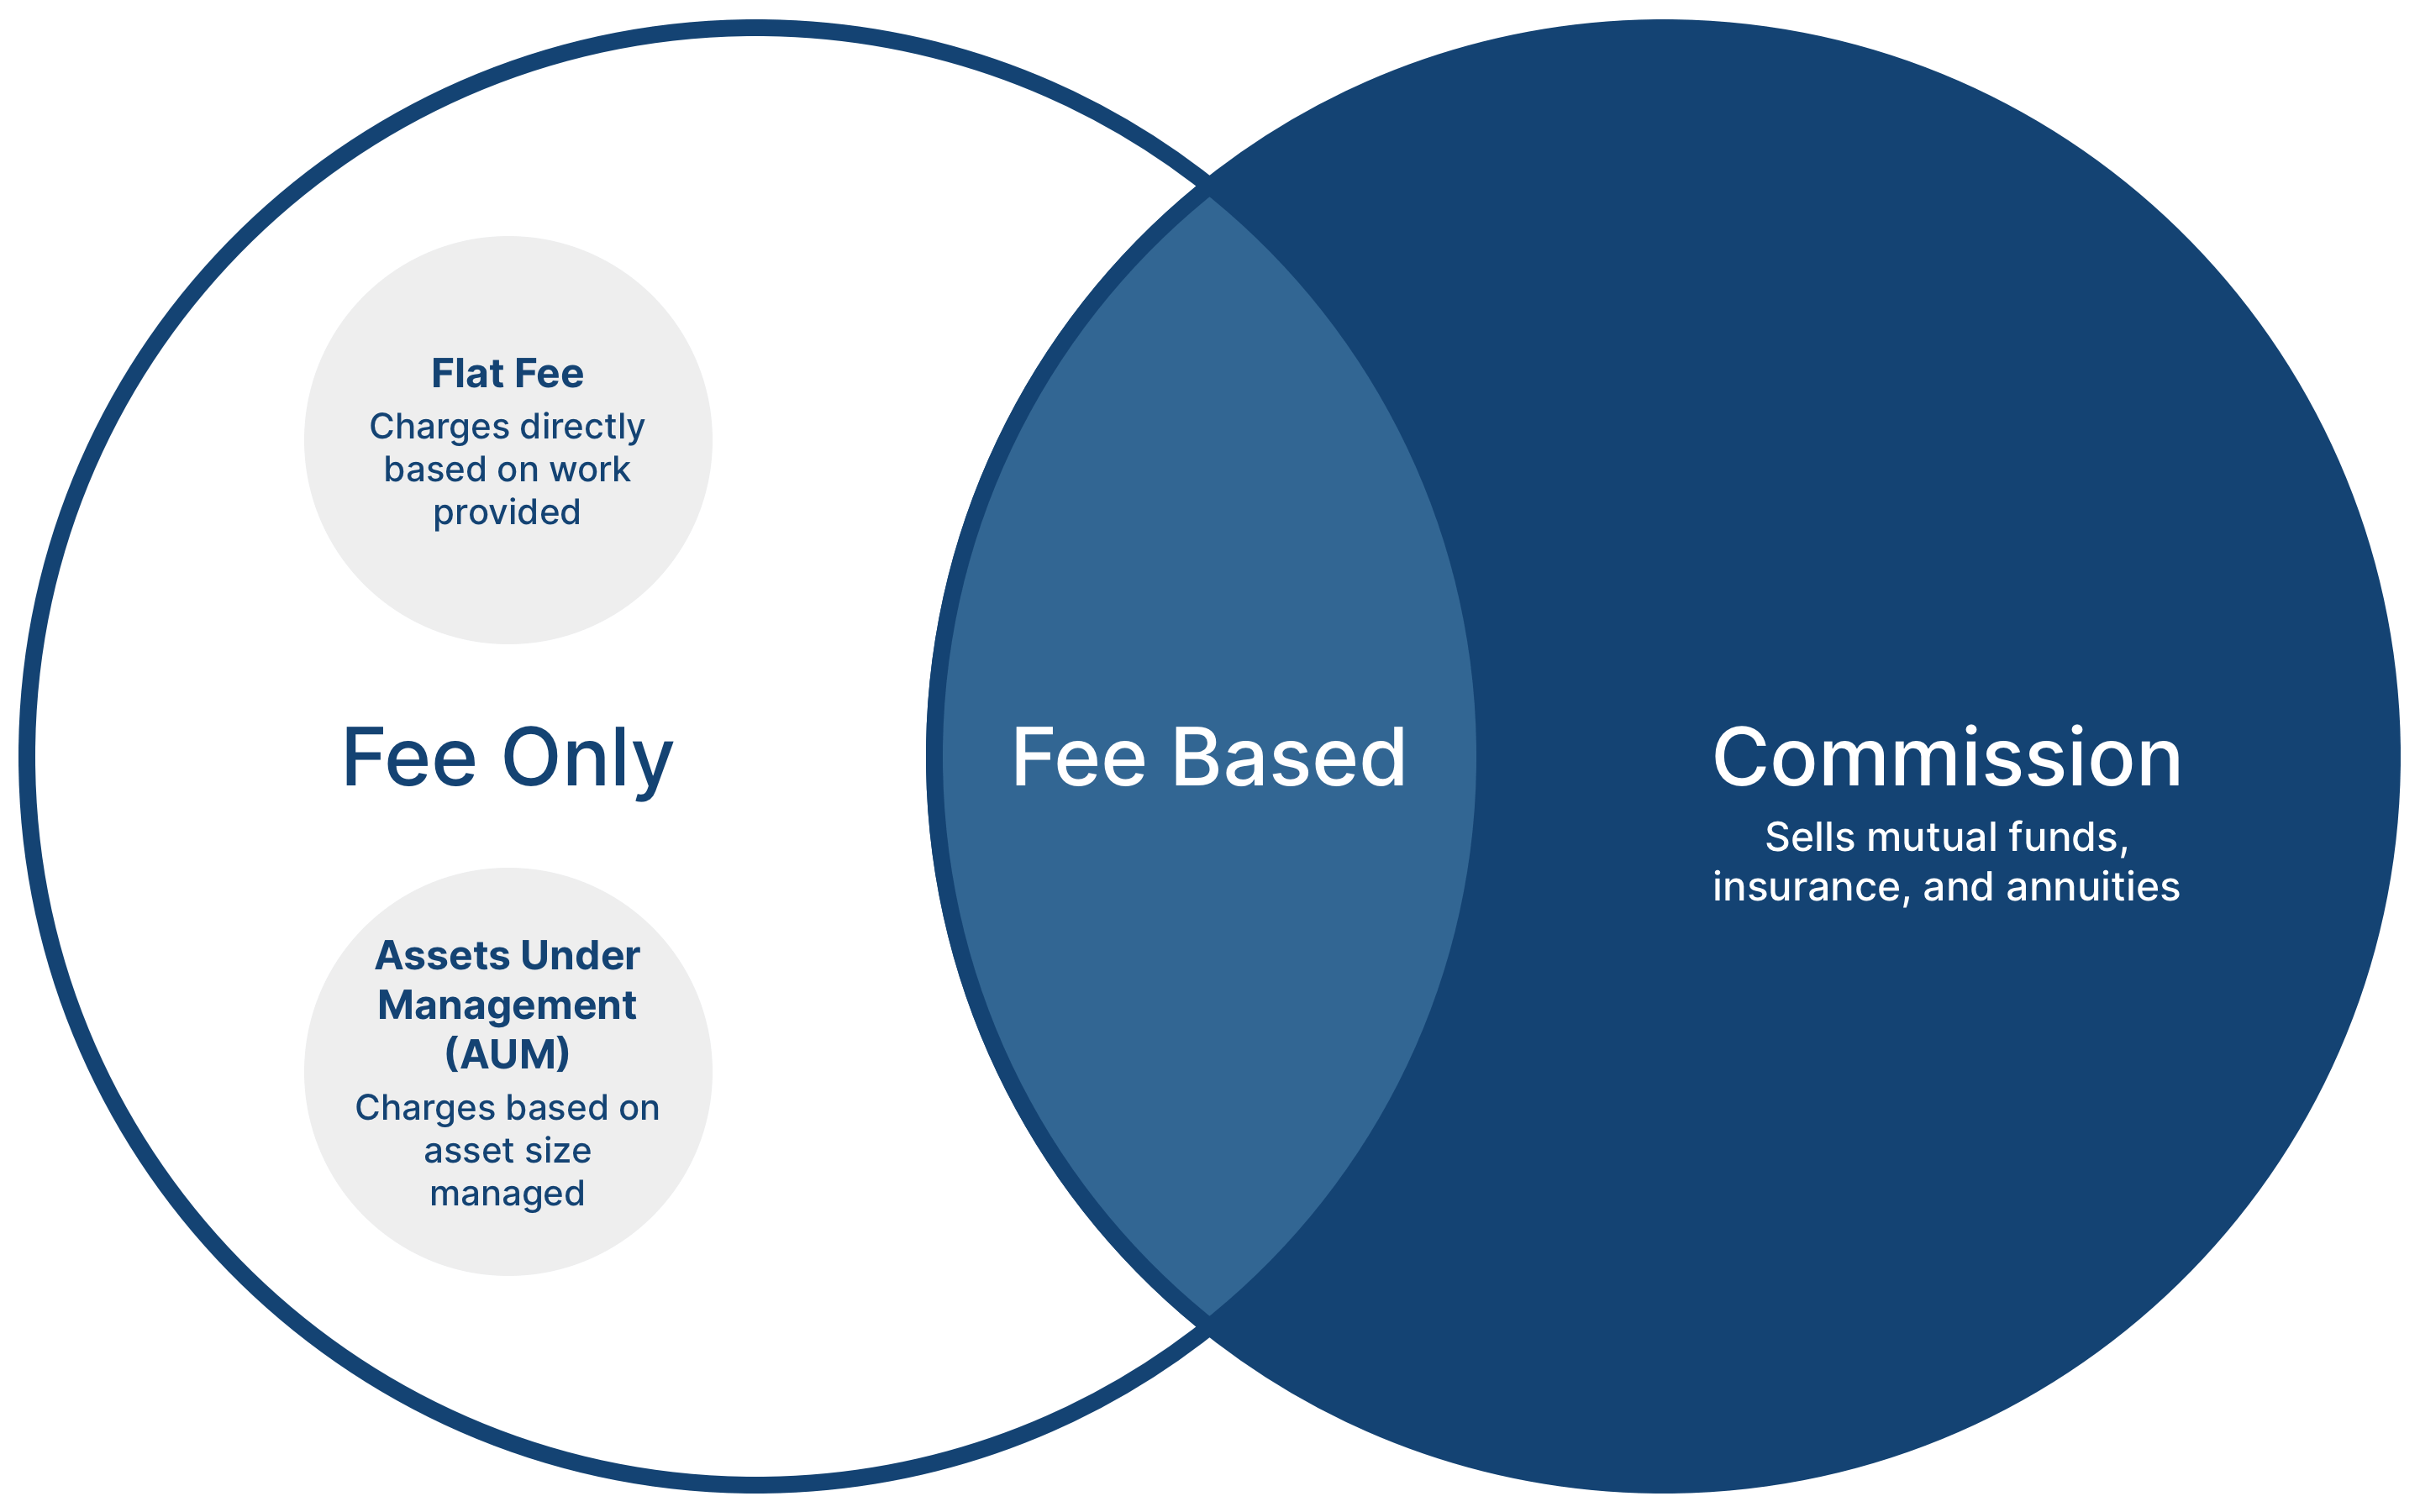 Venn Diagram. The left circle reads 'Fee Only' with two other circles inside: 'Flat fee: charges directly based on work provided' and 'Assets Under Management (AUM): charges based on asset size managed.' The right half of the Venn Diagram reads: 'Commission: sells mutual funds, insurance, and annuities.' The center, overlapping section of the diagram reads 'Fee Based'.